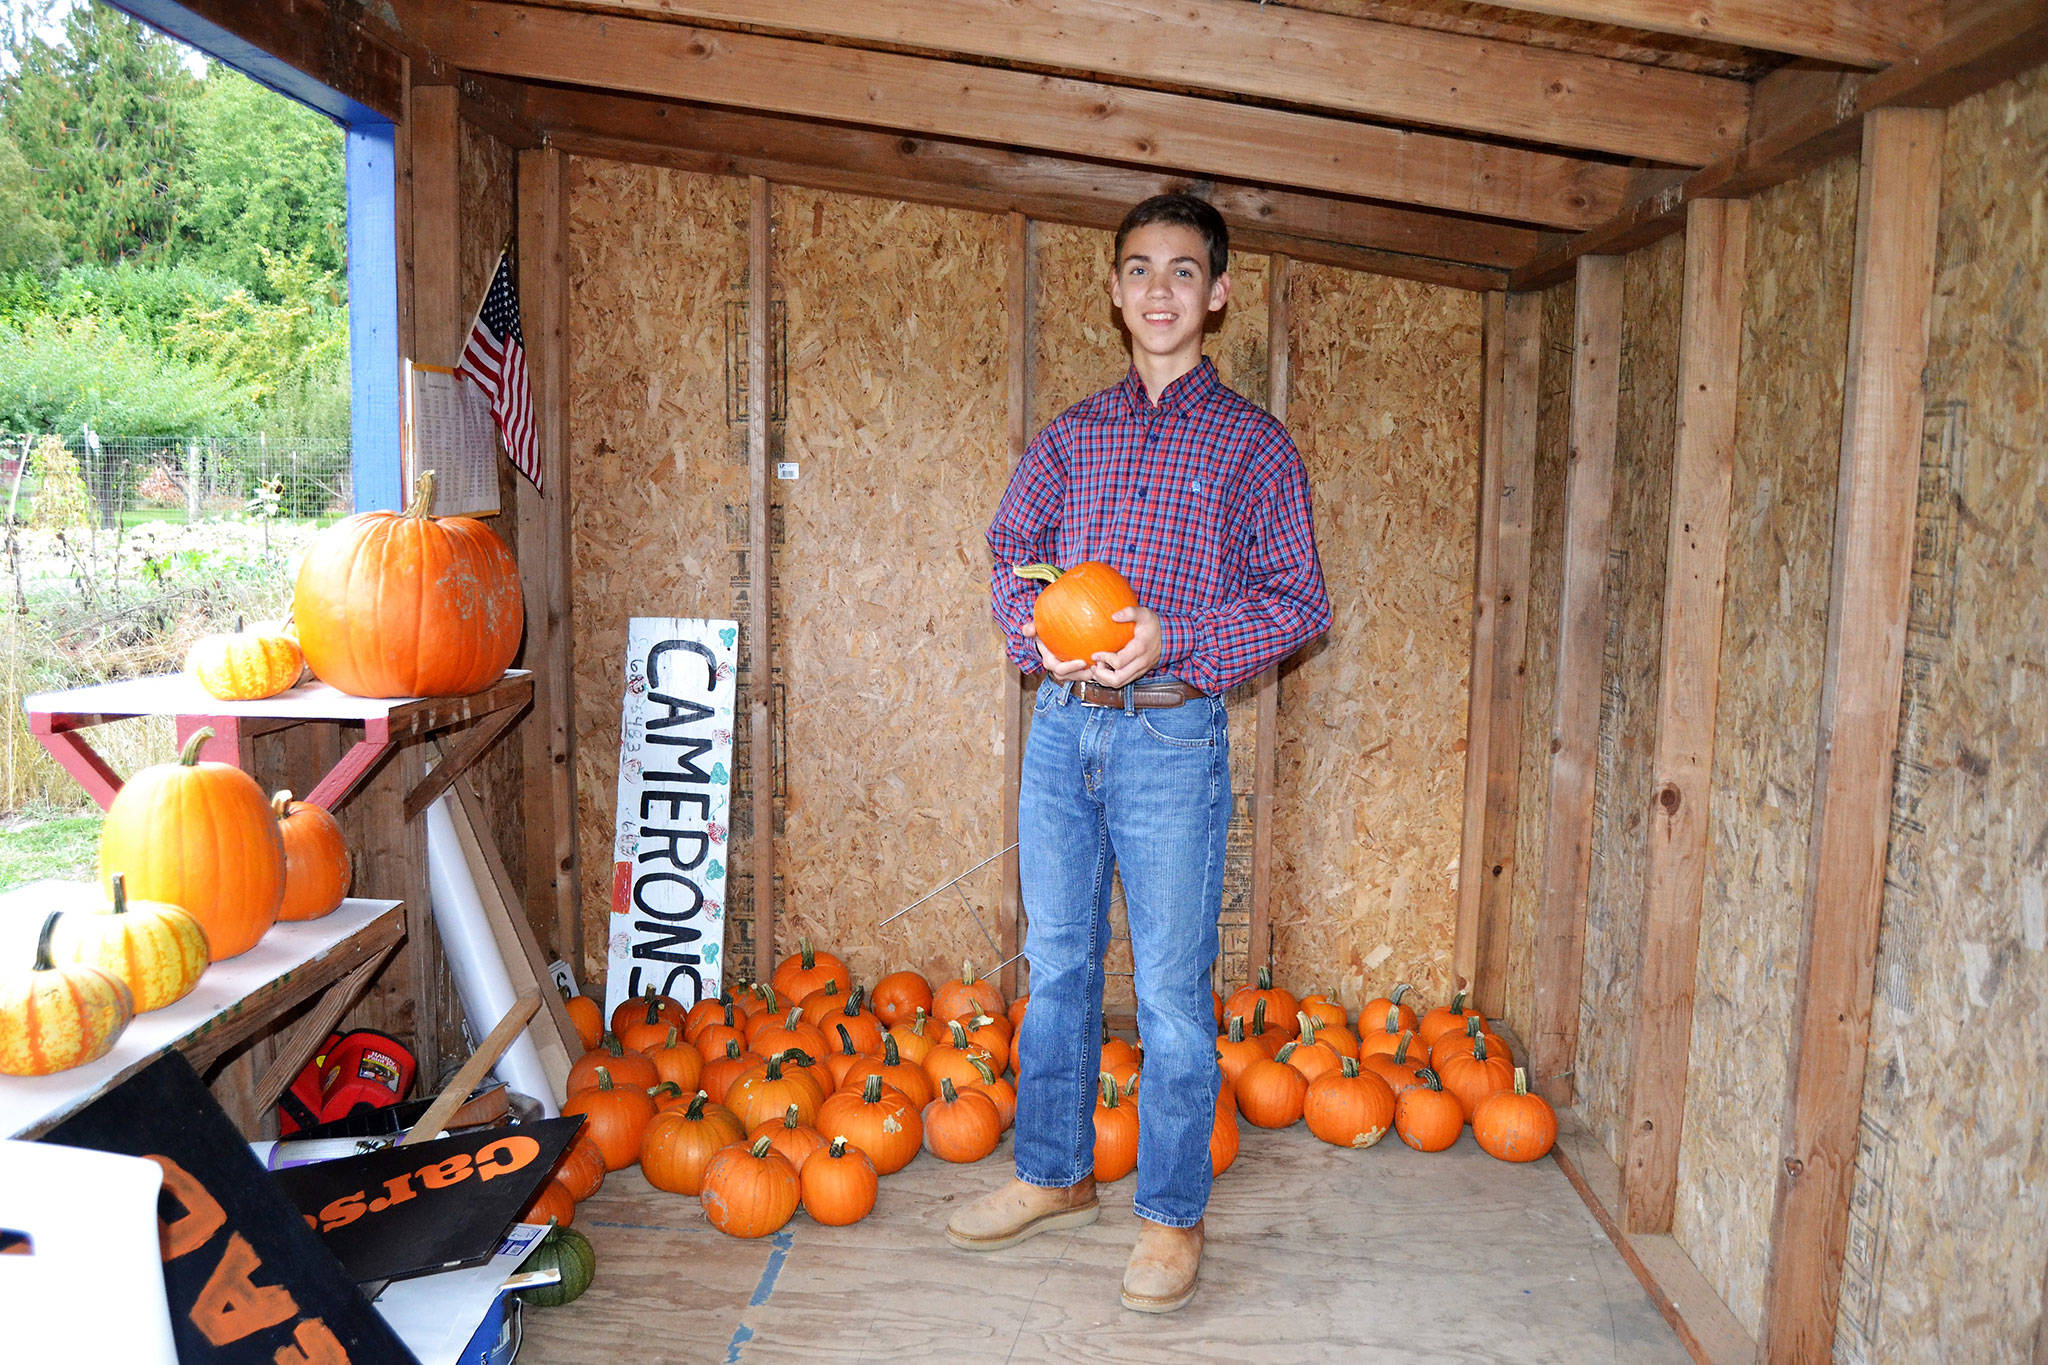 Carson Holt plans to sell pumpkins out of the former Cameron’s Berry Farm stand that was gifted to him. (Matthew Nash/Olympic Peninsula News Group)